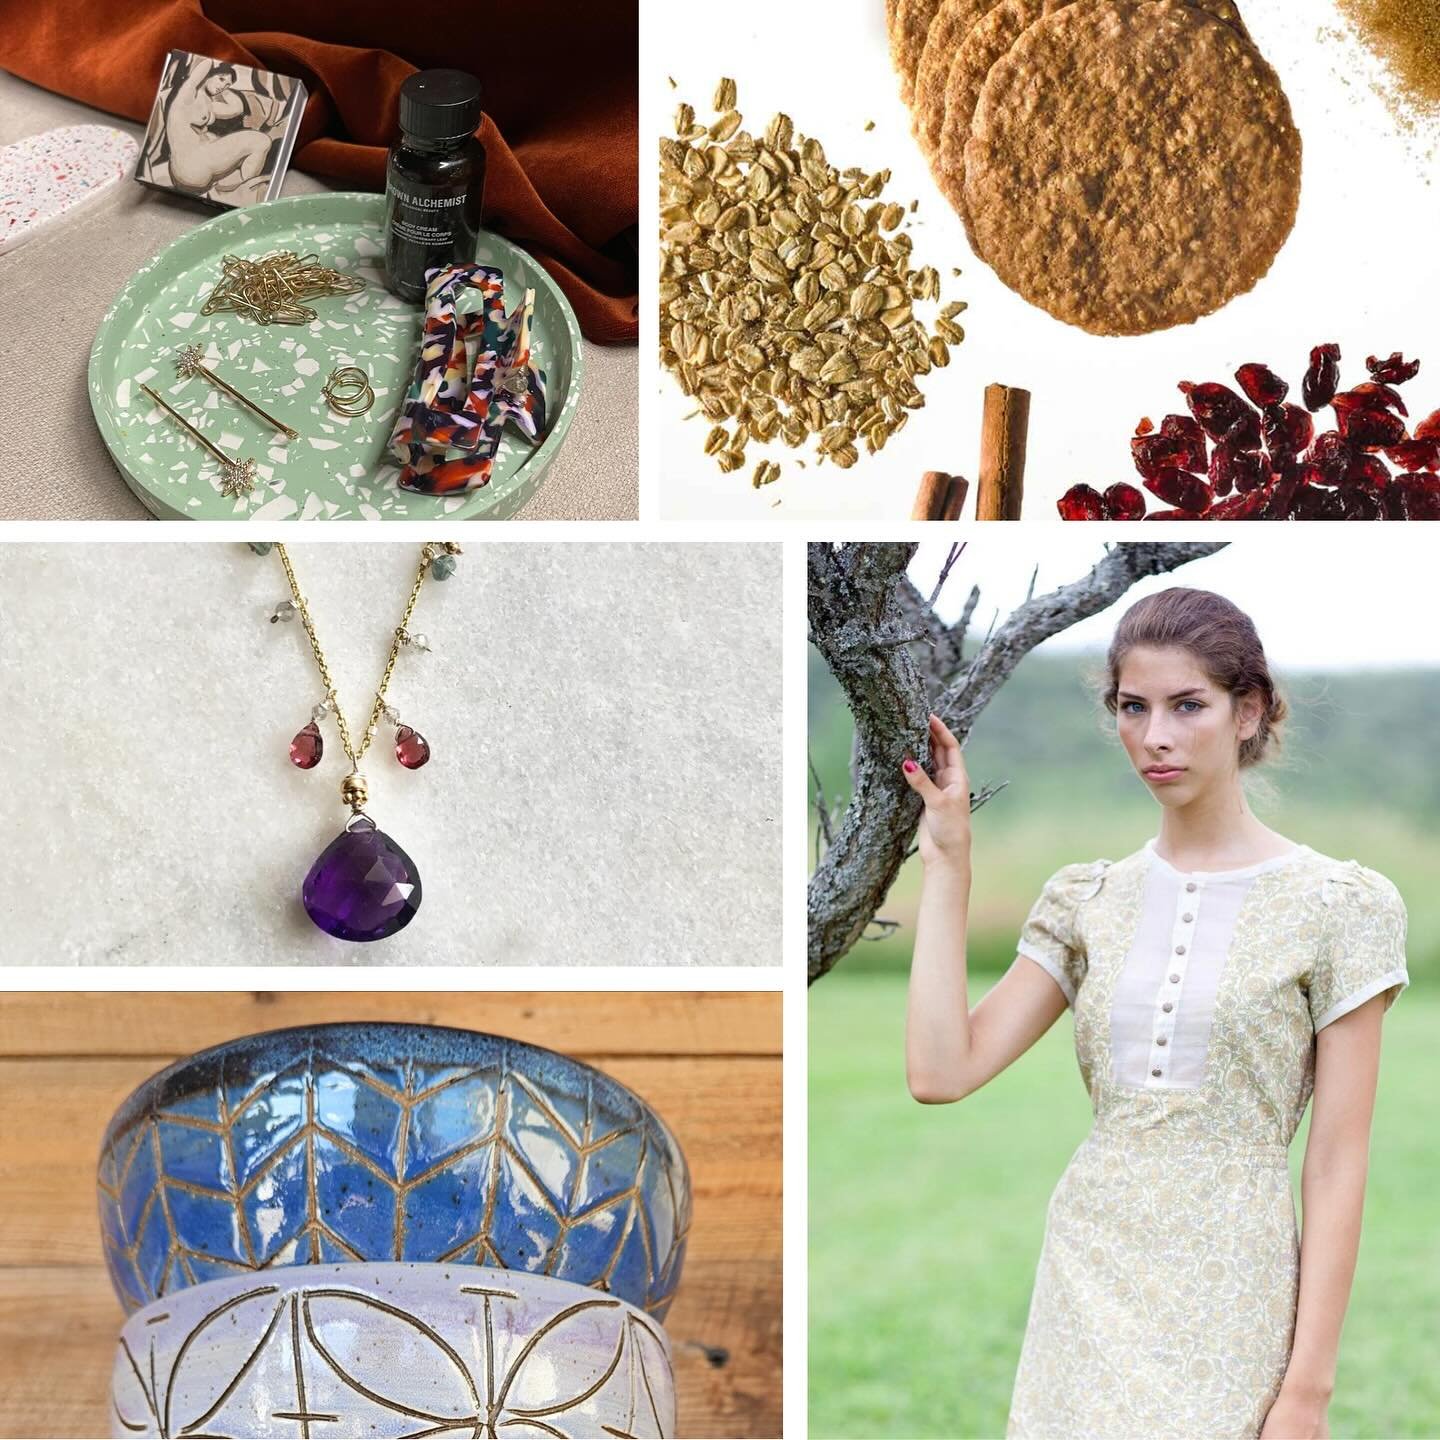 The best of the Berkshires and beyond awaits you THIS WEEKEND at our HEIRLOOM by design spring market!

Saturday, May 11th, 10am-4pm, FREE ENTRY!
PLUS ☕️Preview Hour from 9am-10am &bull; FREE @touchy.coffee, gift bag, intimate shopping experience, an